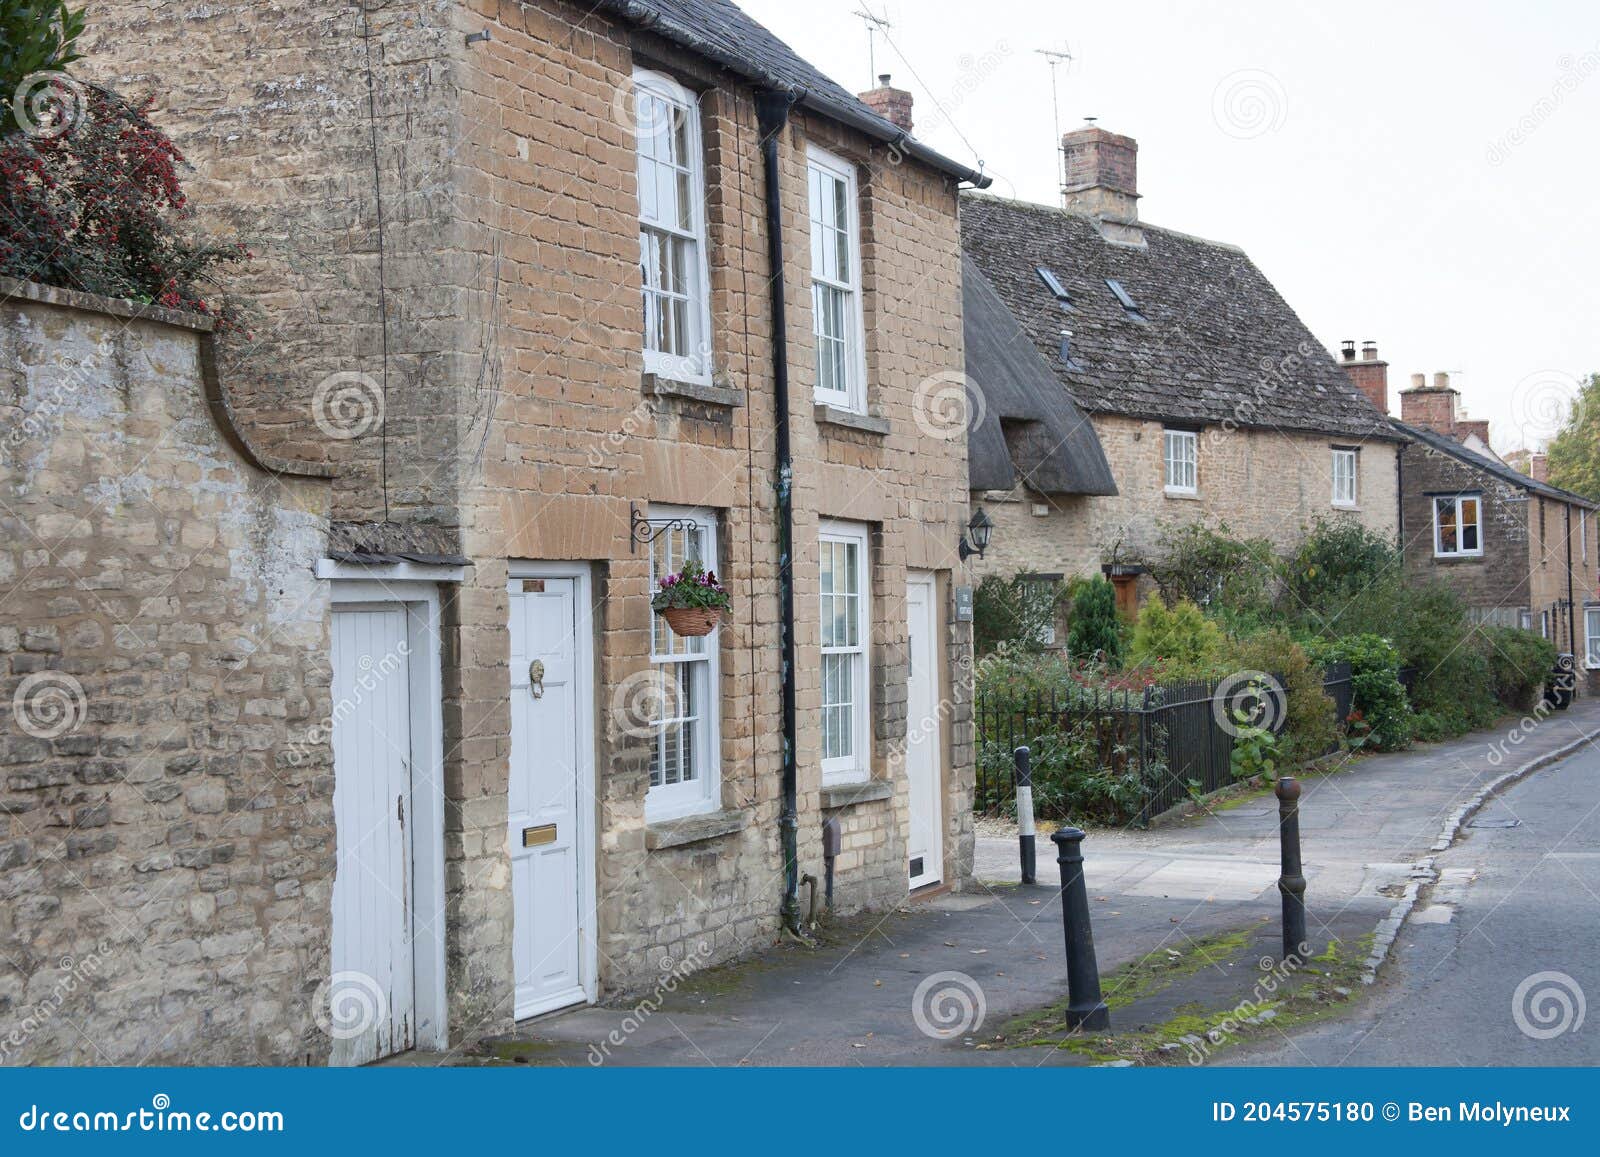 Stone Cottages In Bampton West Oxfordshire In The United Kingdom